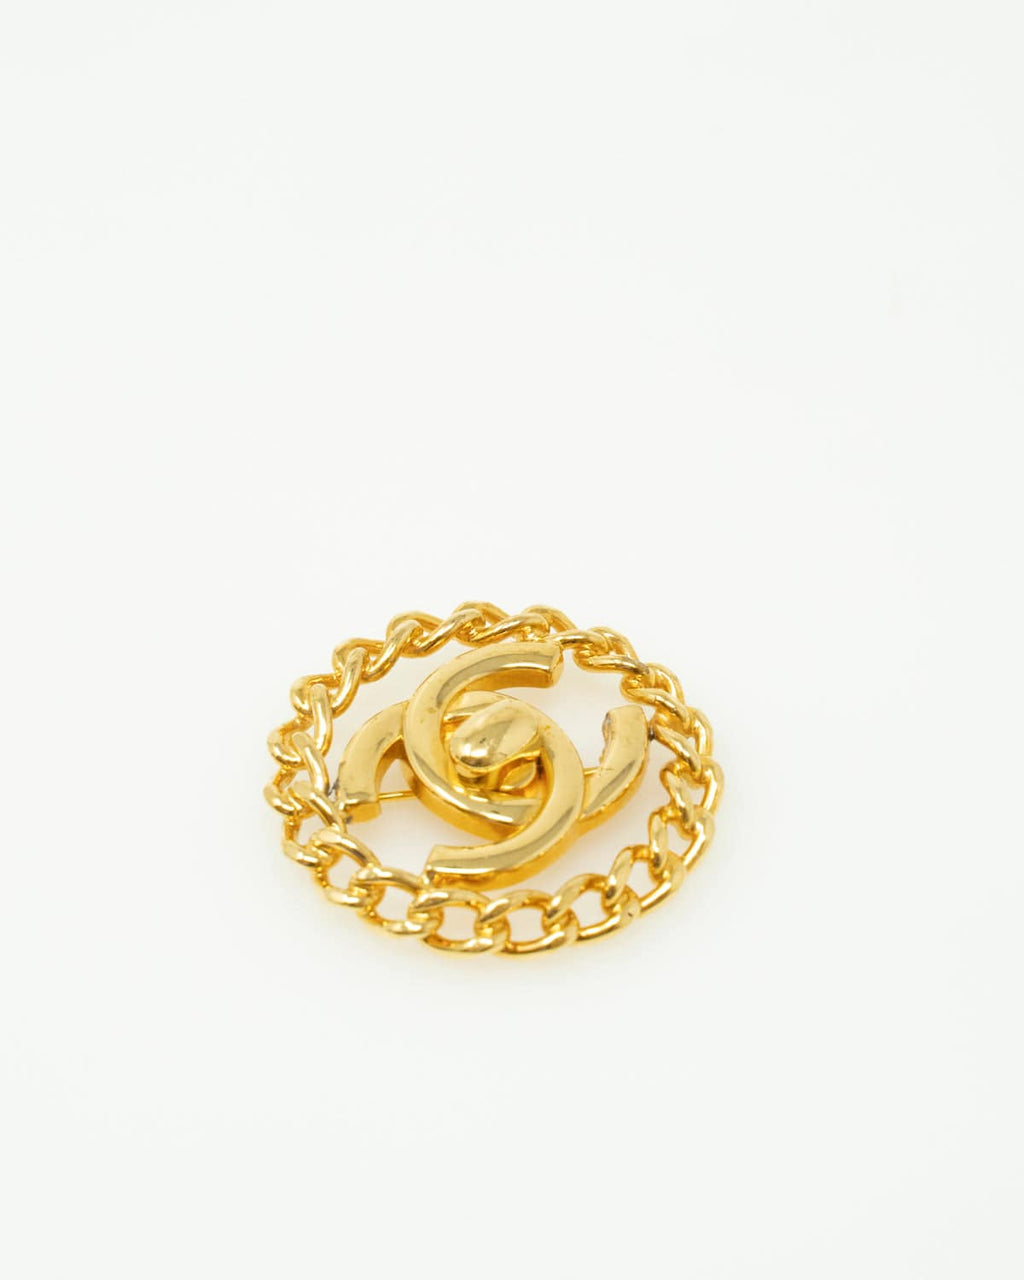 Cc pin & brooche Chanel Gold in Metal - 28518818